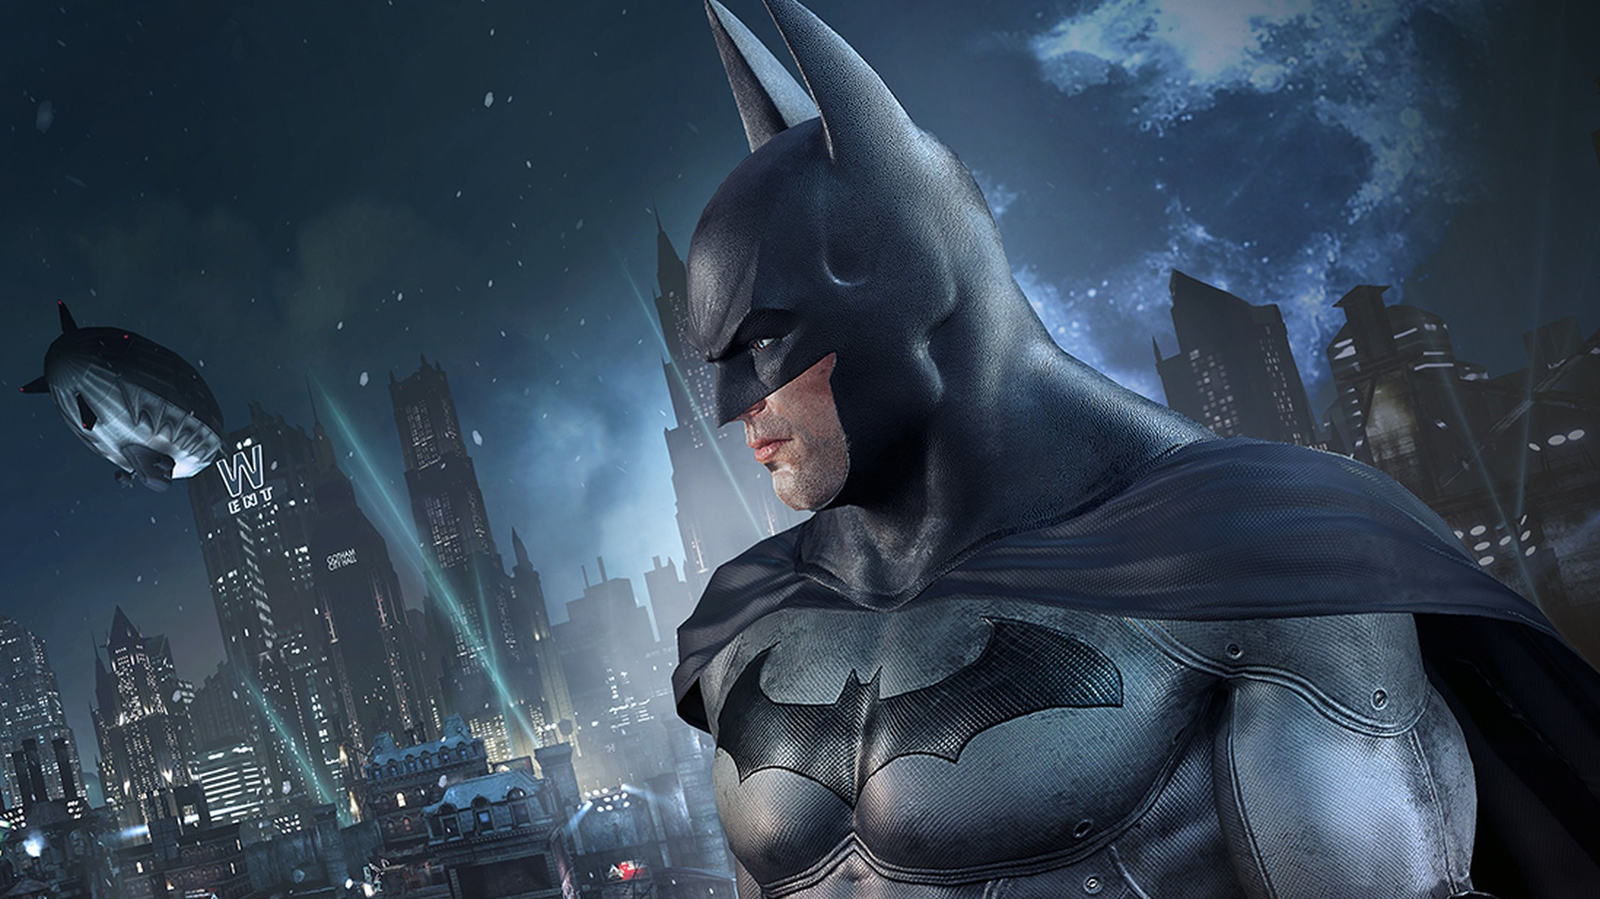 Batman Return to Arkham is the most disappointing Xbox One X